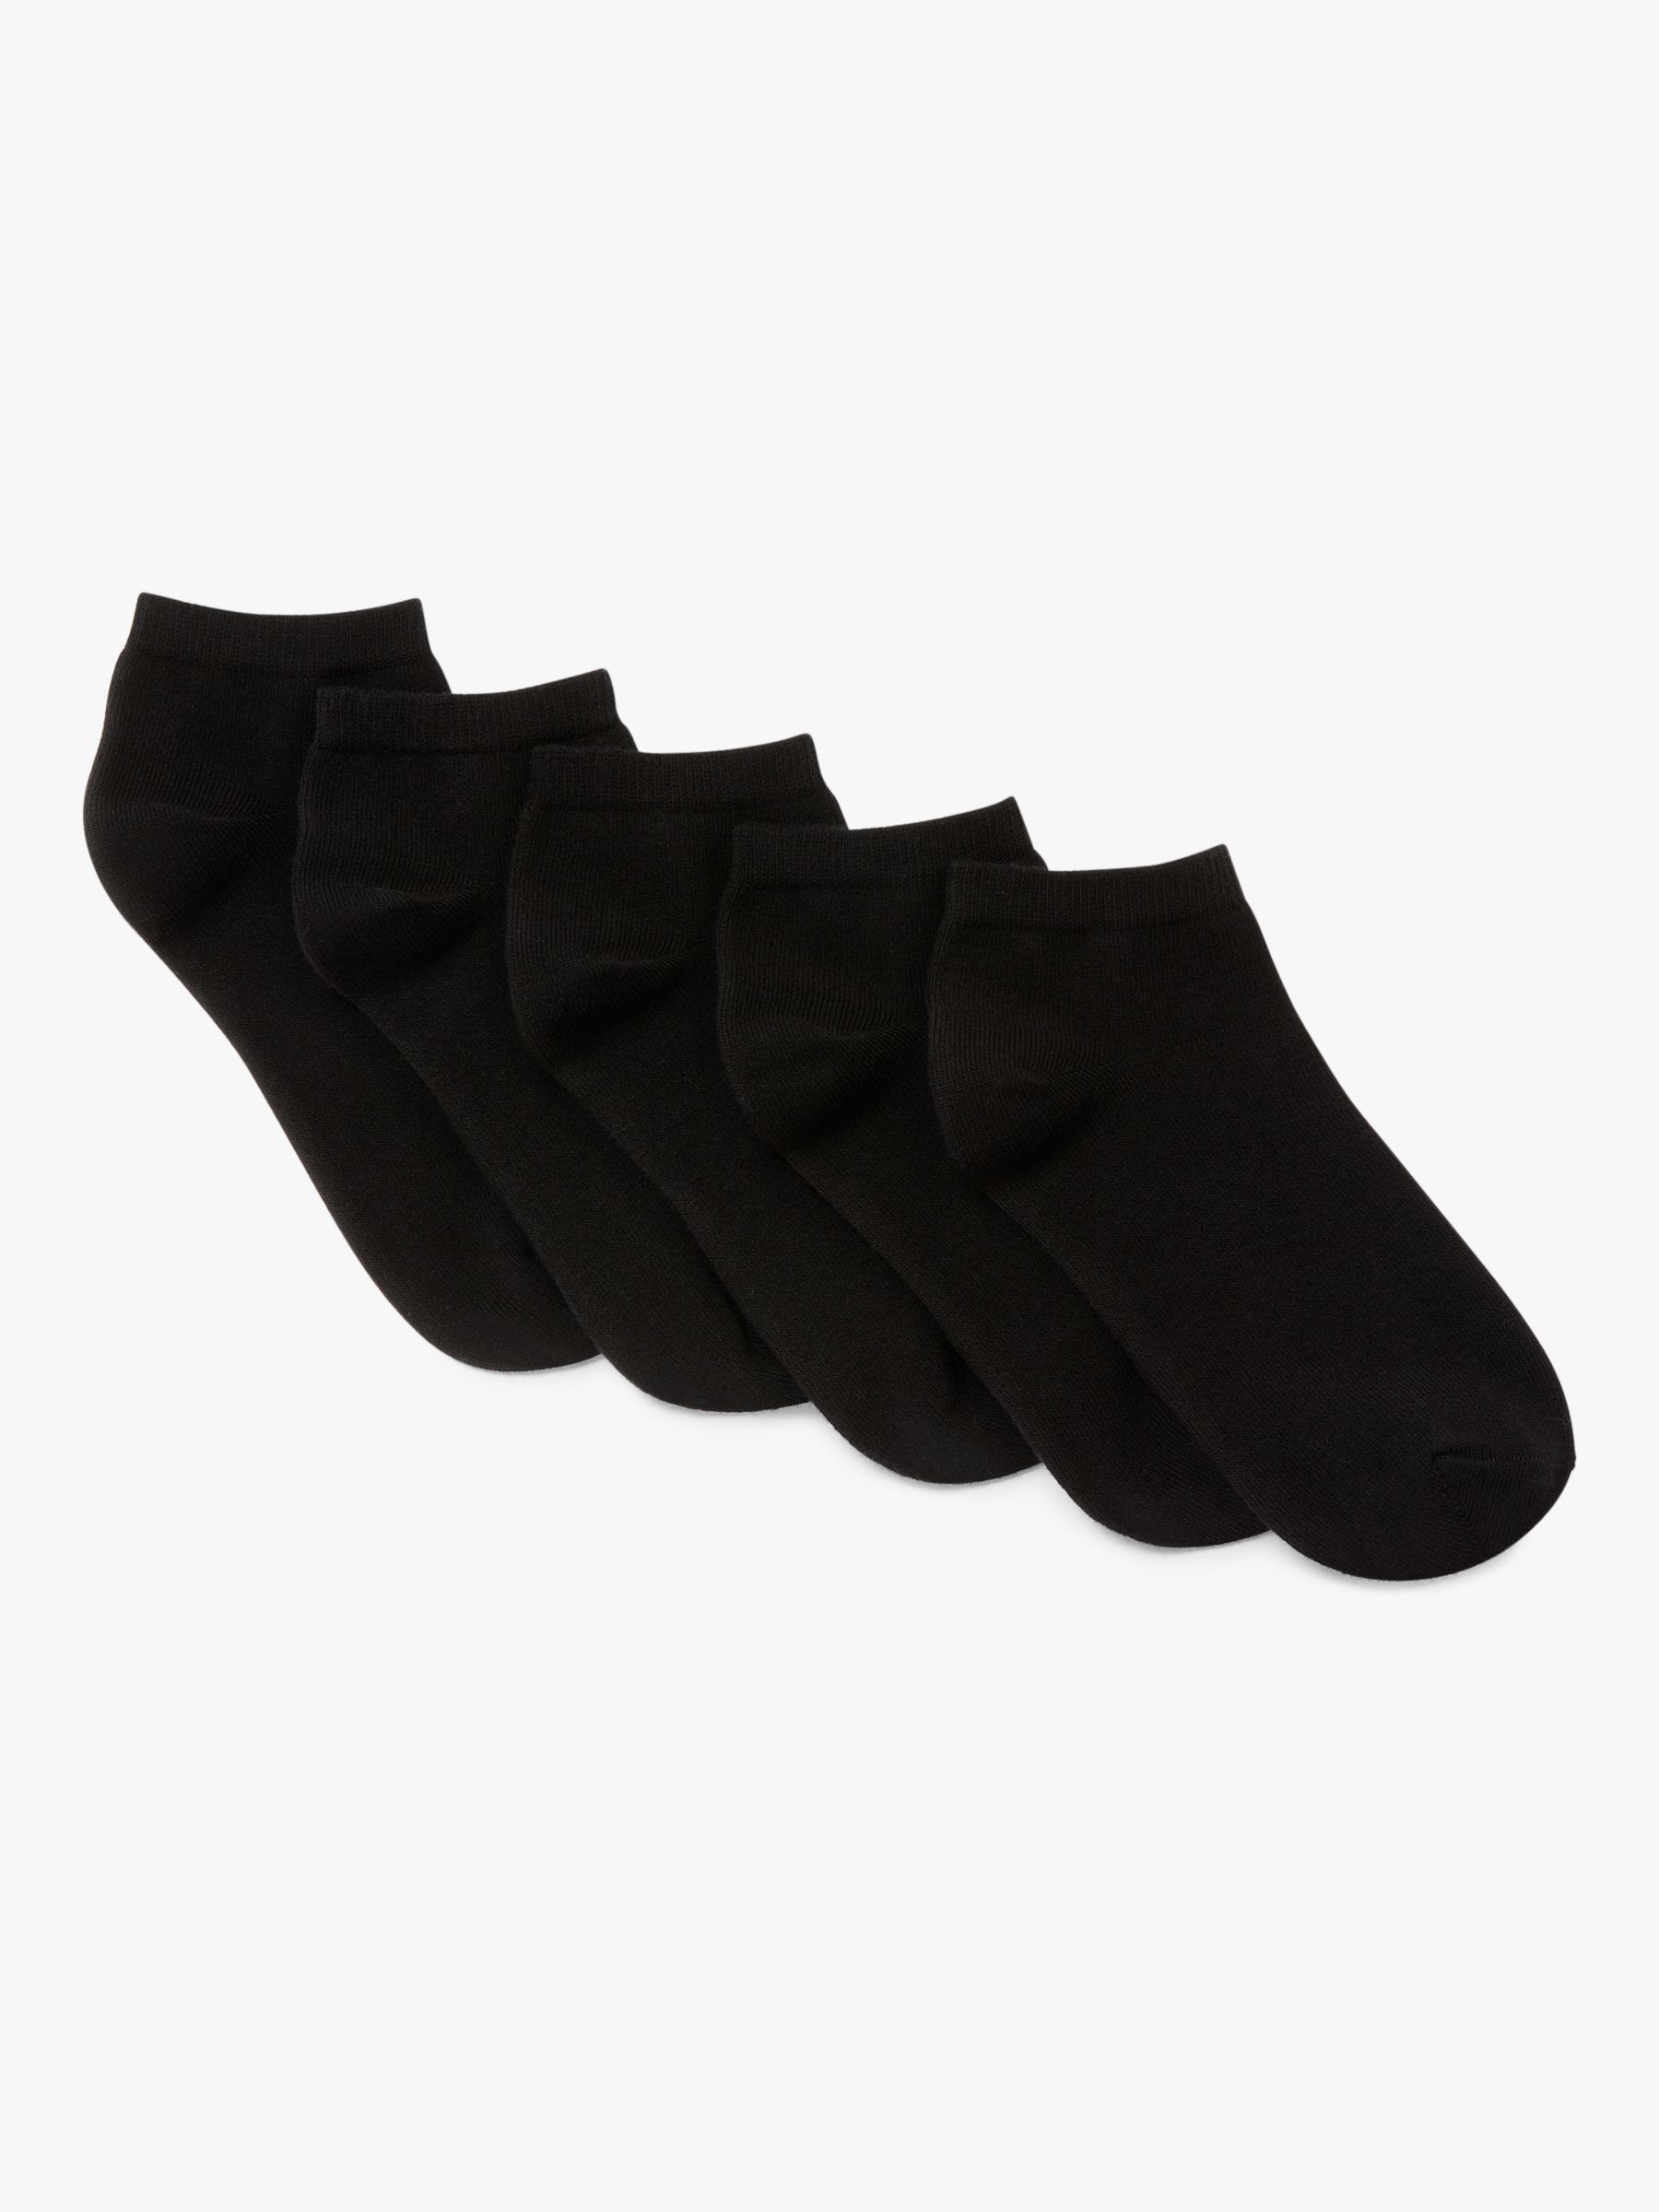 Buy John Lewis ANYDAY Women's Cotton Mix Trainer Socks, Pack of 5, Black Online at johnlewis.com